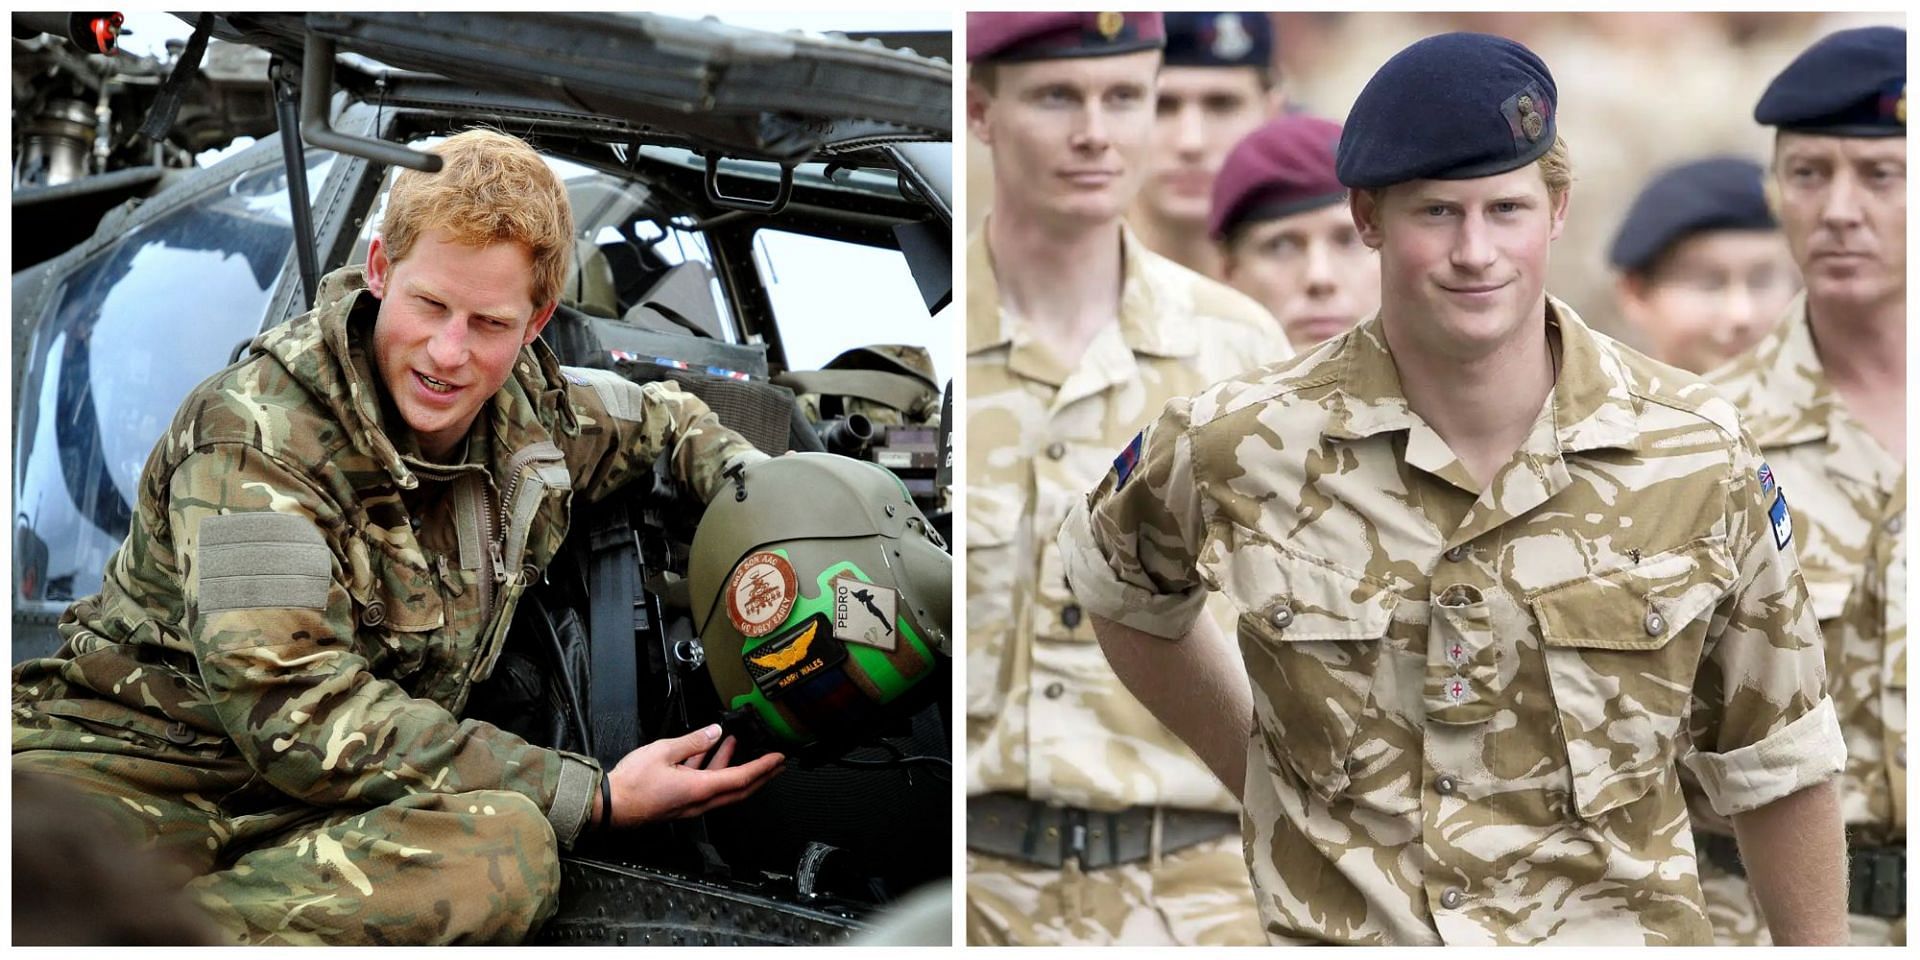 What did Prince Harry say about serving the military? Details revealed as his book, Spare, gets leaked. (Image via Twitter)